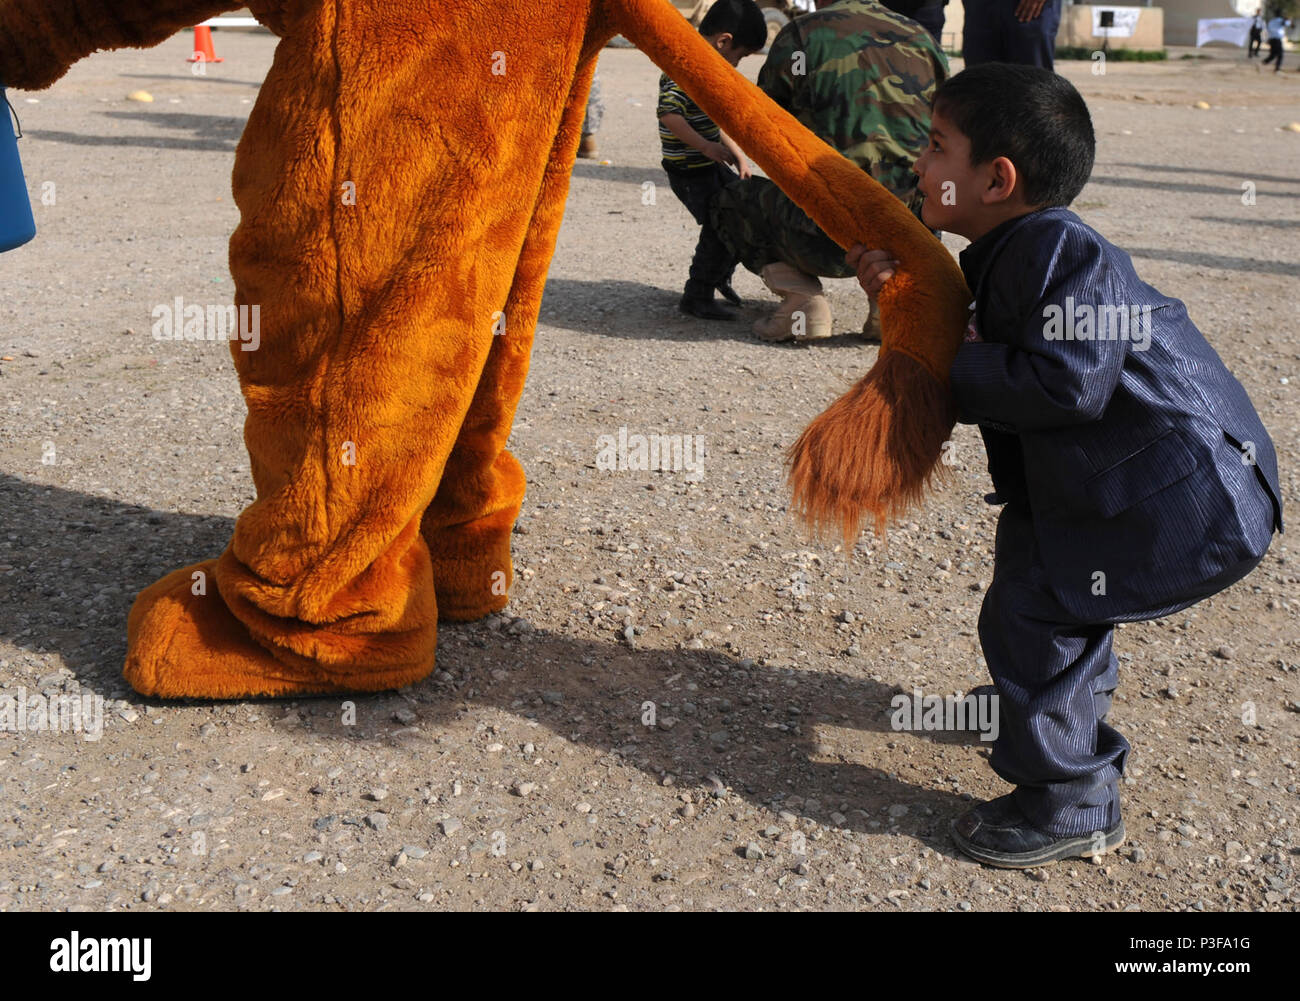 A young boy is anxious to  get the attention of The Lion of Kirkuk, portrayed by U.S. Army Spc. Brandon Smith, Mortar Platoon, Headquarters and Headquarters Company, 1st Battalion, 30th Infantry, 2nd Brigade Combat Team, 3rd Infantry Division, during a humanitarian aide drop at the Emergency Response Unit compound in Kirkuk, Iraq, Jan. 18. Soldiers from 1-30 IR and members of the Iraqi Emergency Response Unit teamed up to distribute food and supplies to 250 families from Adallah, one of the poorest villages in the province of Kirkuk. Stock Photo